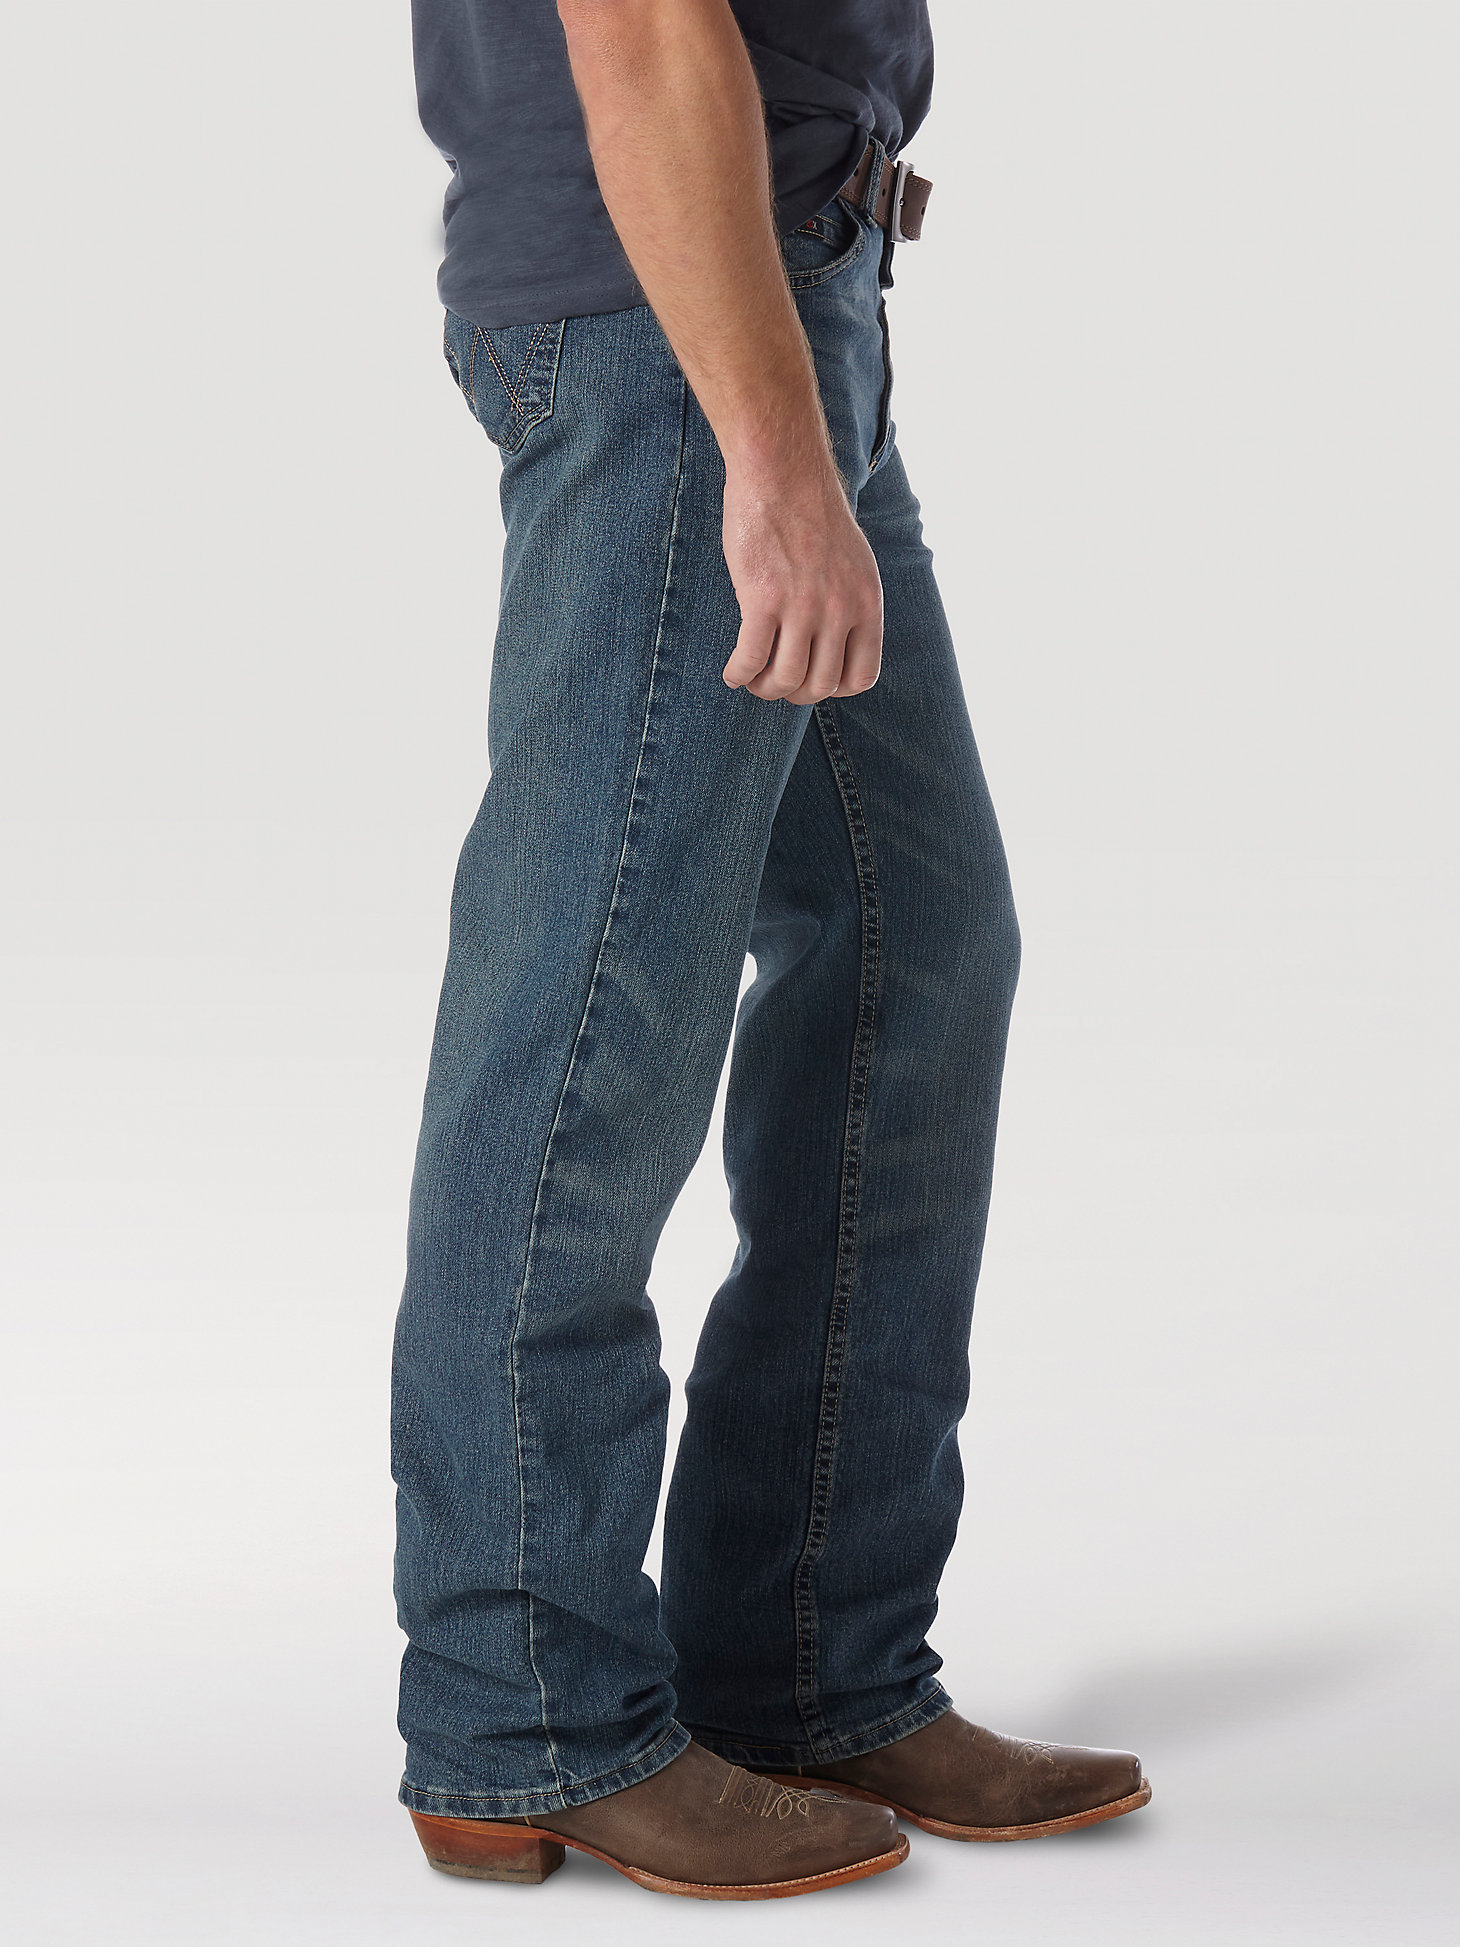 Wrangler® 20X® Advanced Comfort 01 Competition Relaxed Jean in Barrel alternative view 1